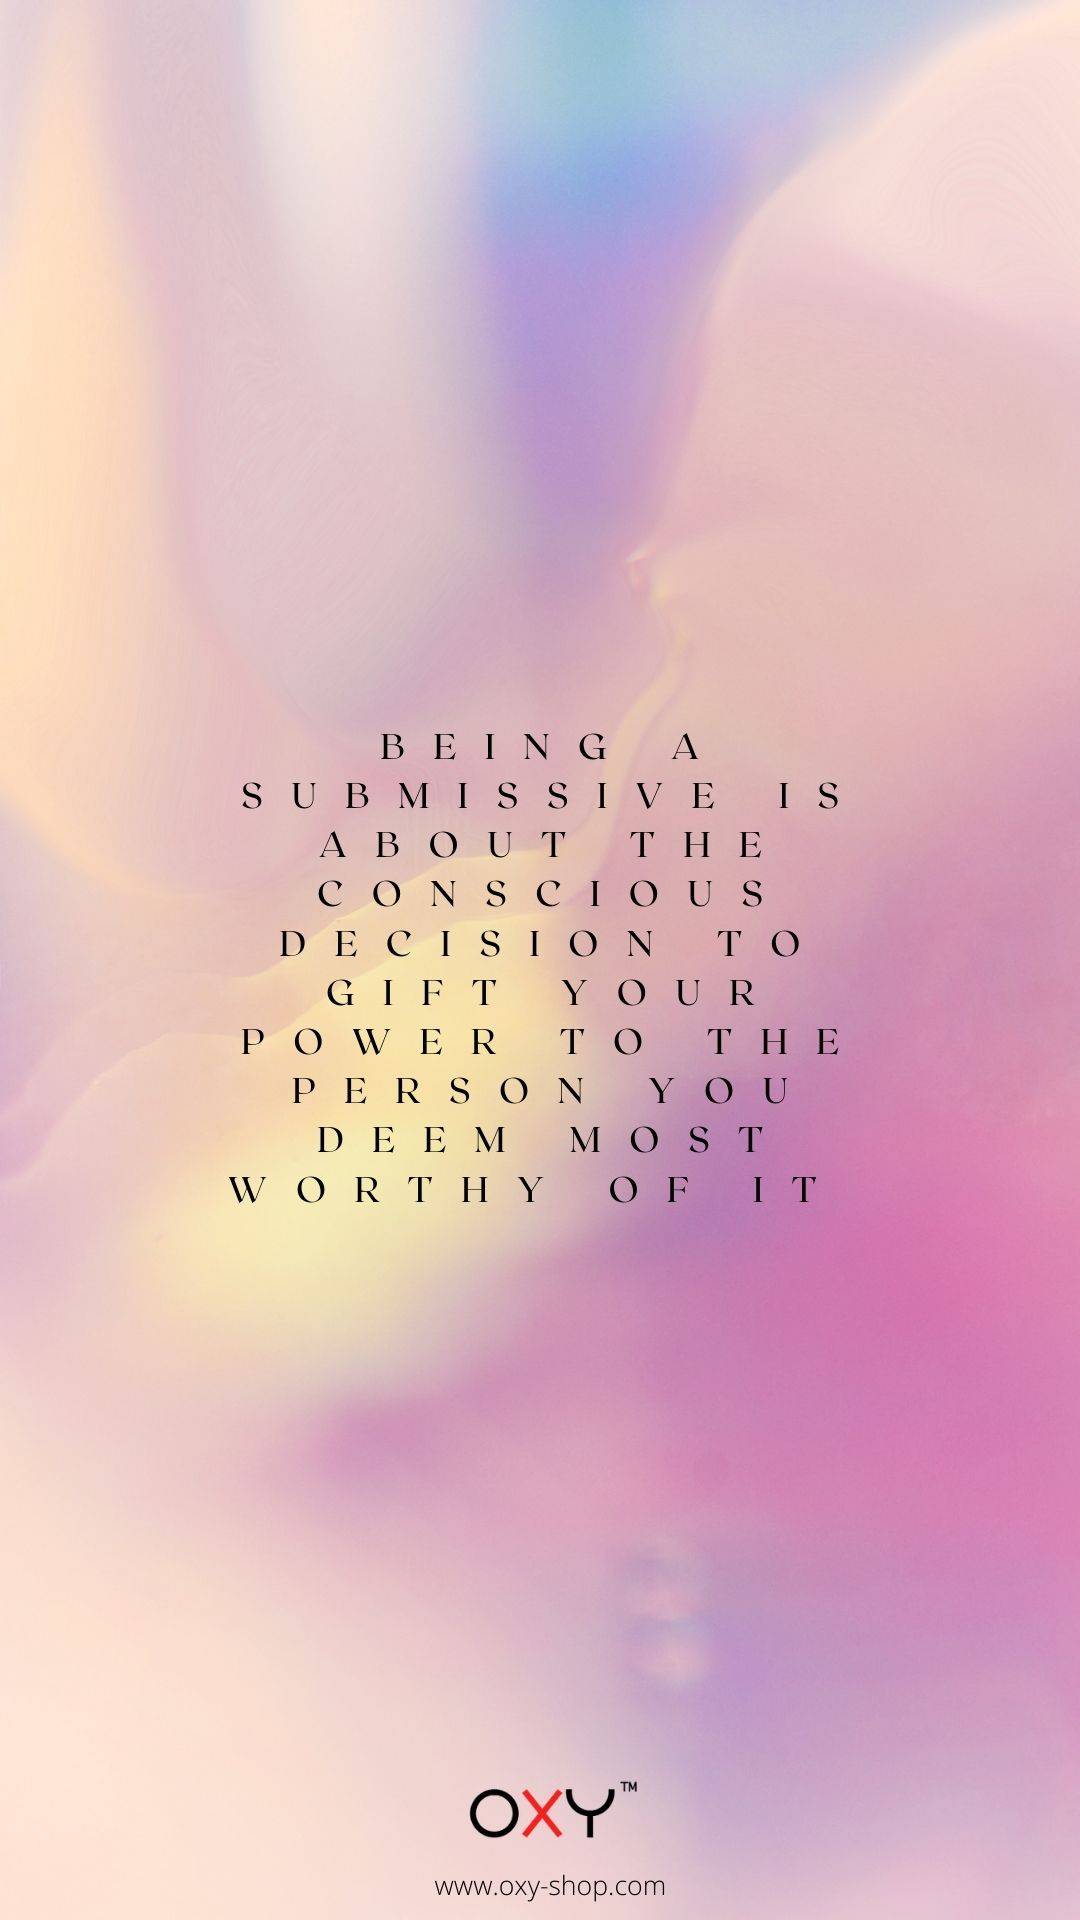 Being a submissive is about the conscious decision to gift your power to the person you deem most worthy of it. - BDSM wallpaper